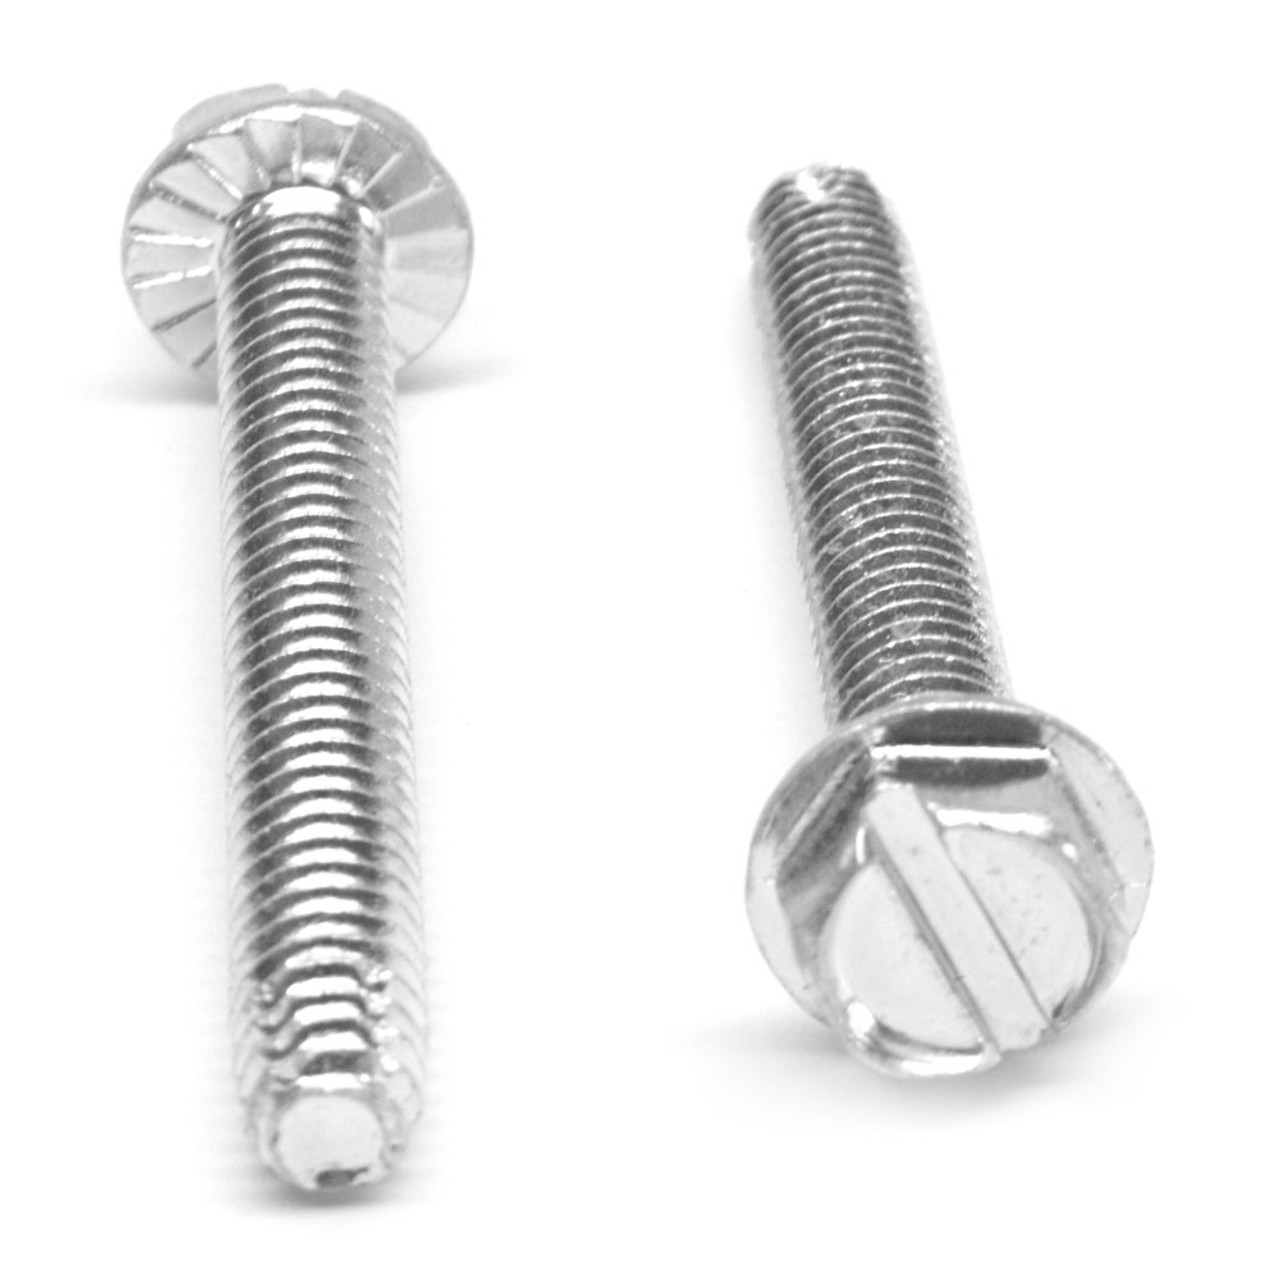 1/4-20 x 3/4 Coarse Thread Thread Cutting Screw Slotted Hex Washer Head with Serration Type F Low Carbon Steel Zinc Plated